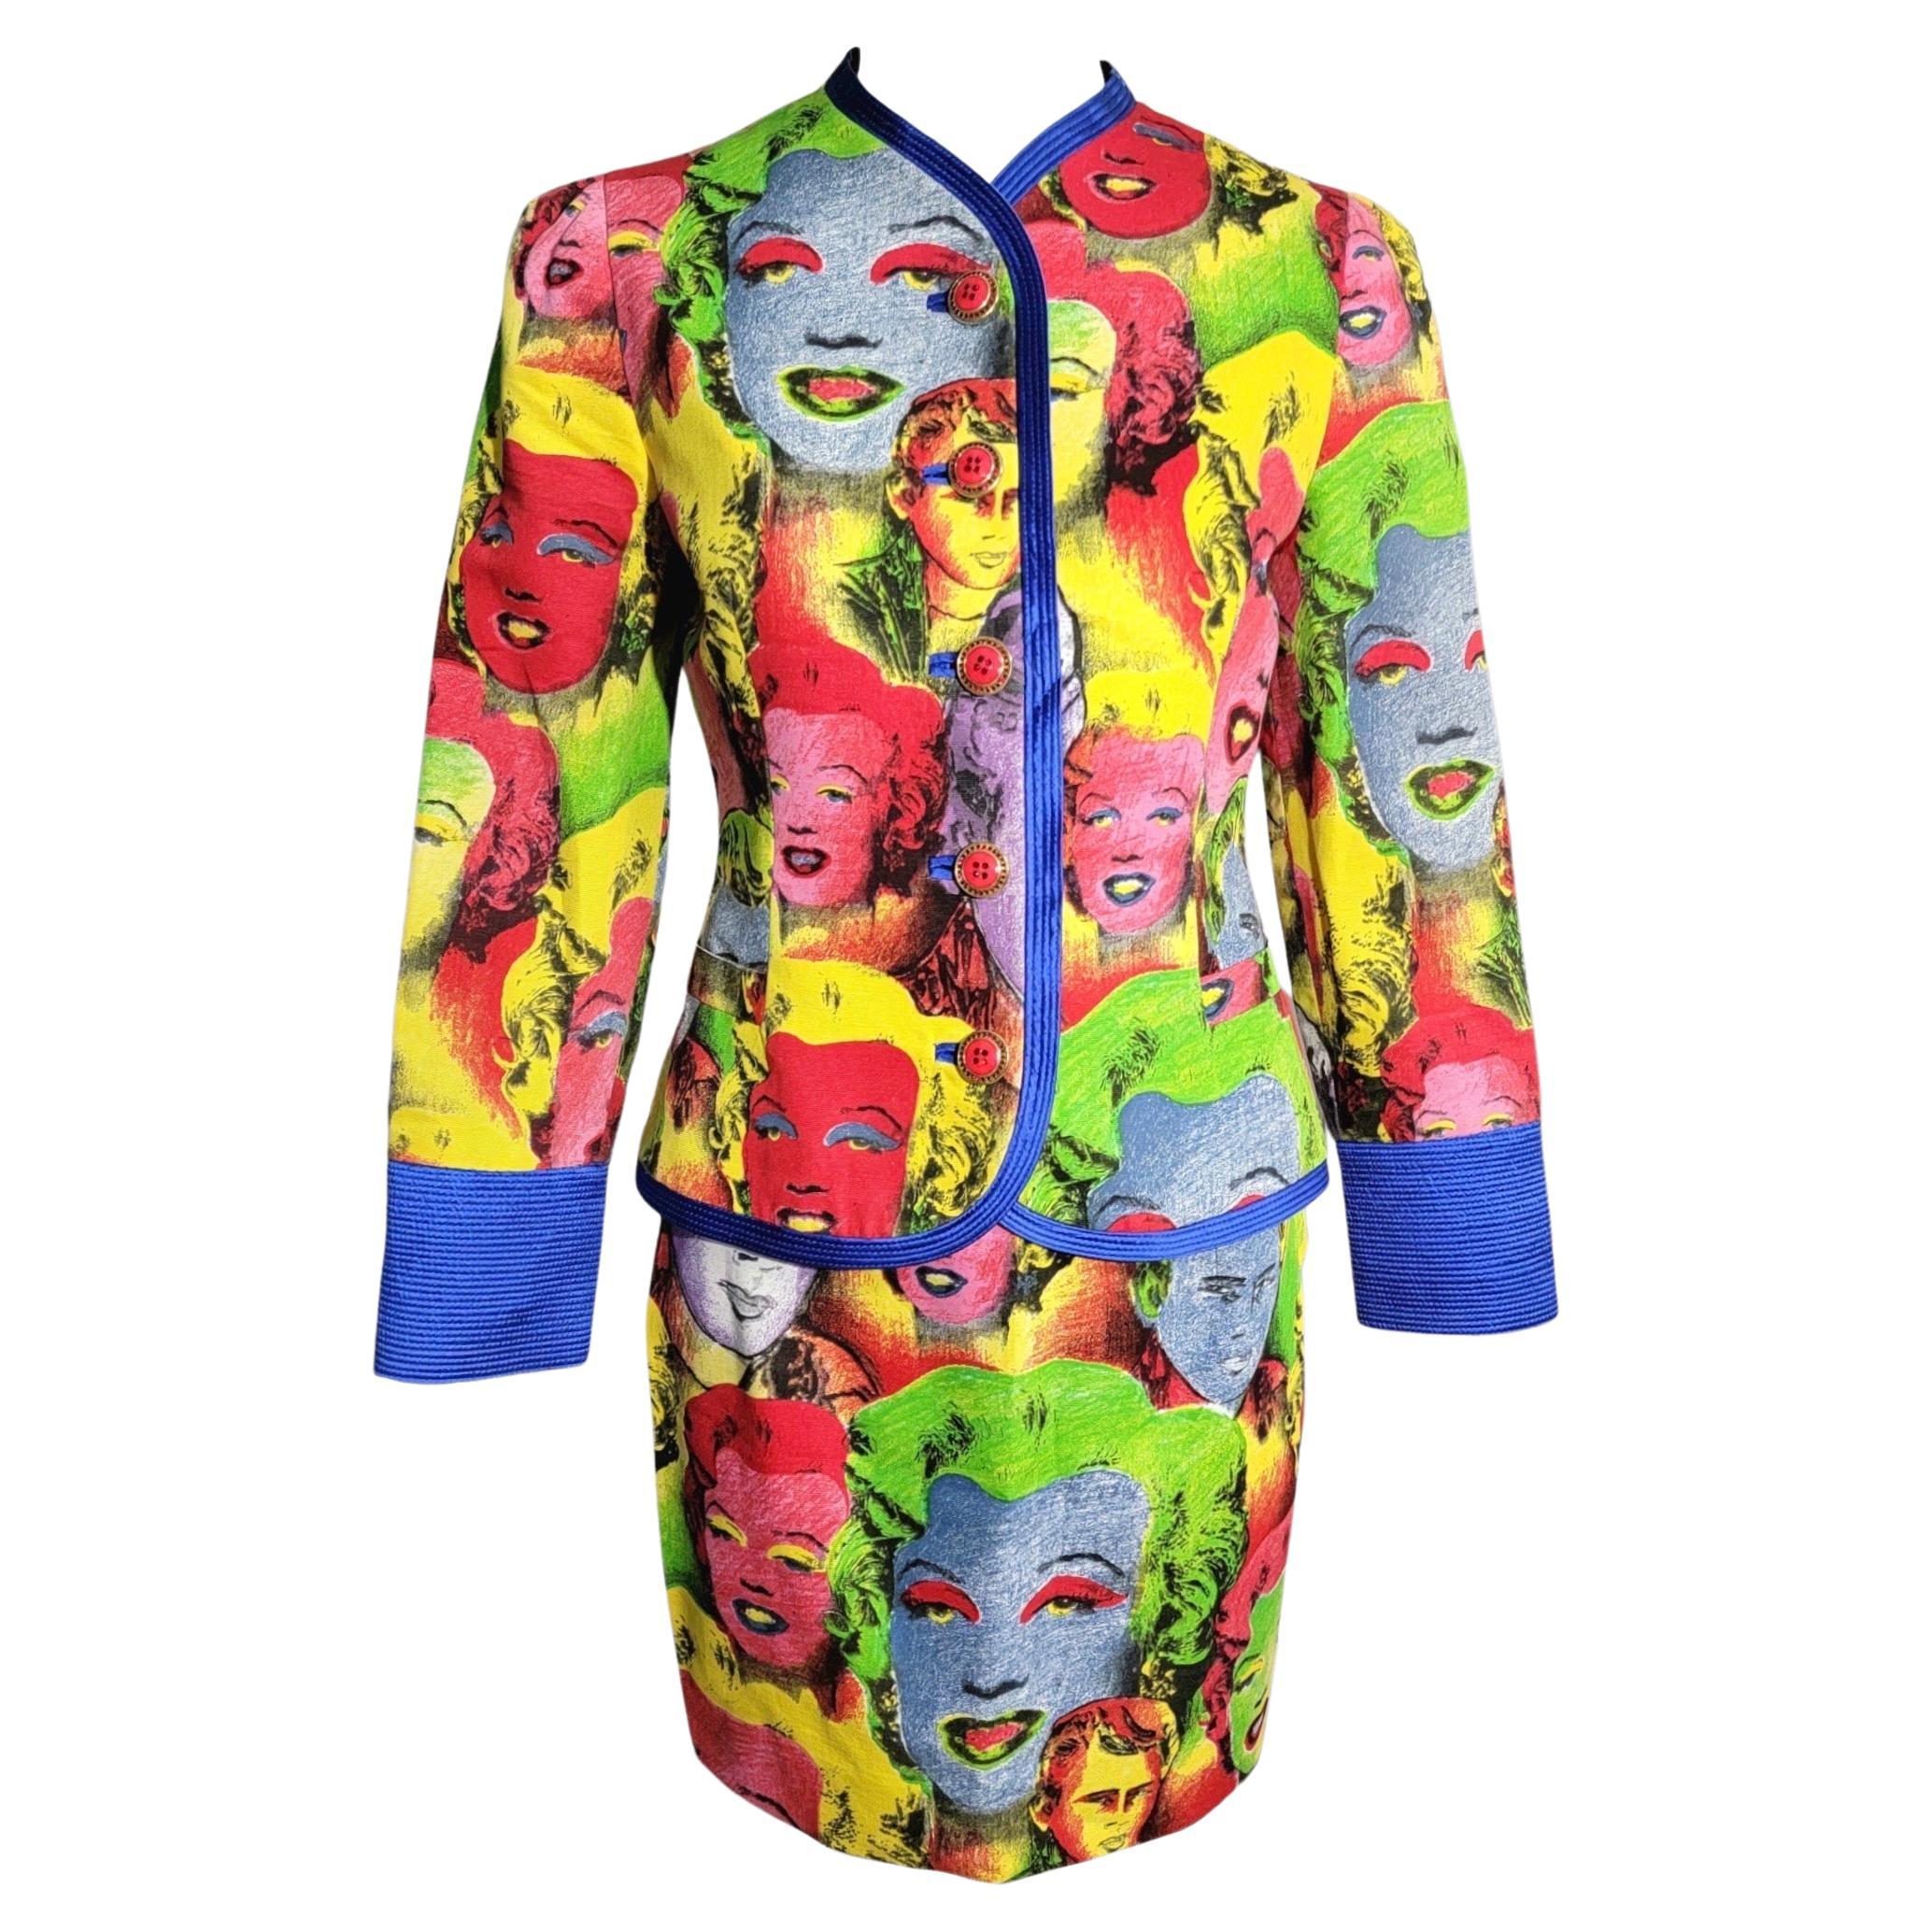 Gianni Versace 1991 Marilyn - 14 For Sale on 1stDibs